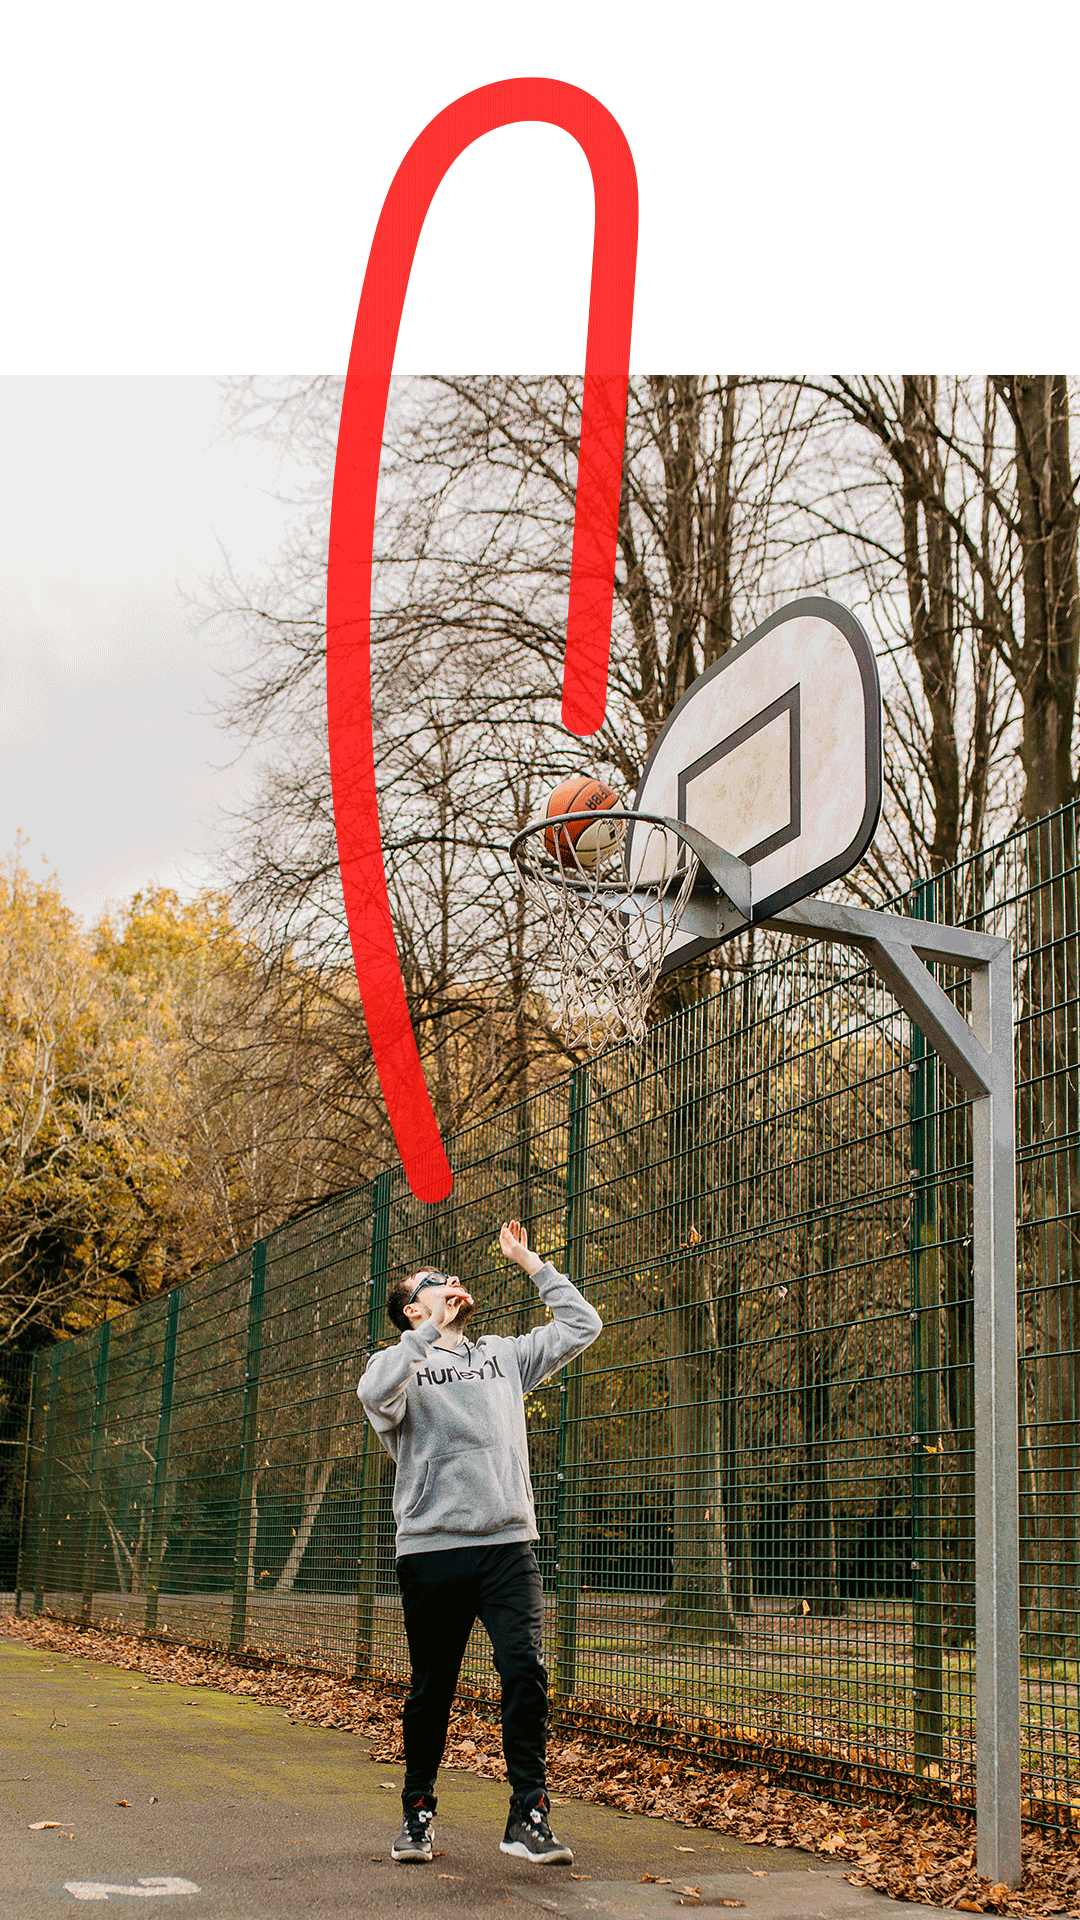 Photo of Niall playing basketball in his local park